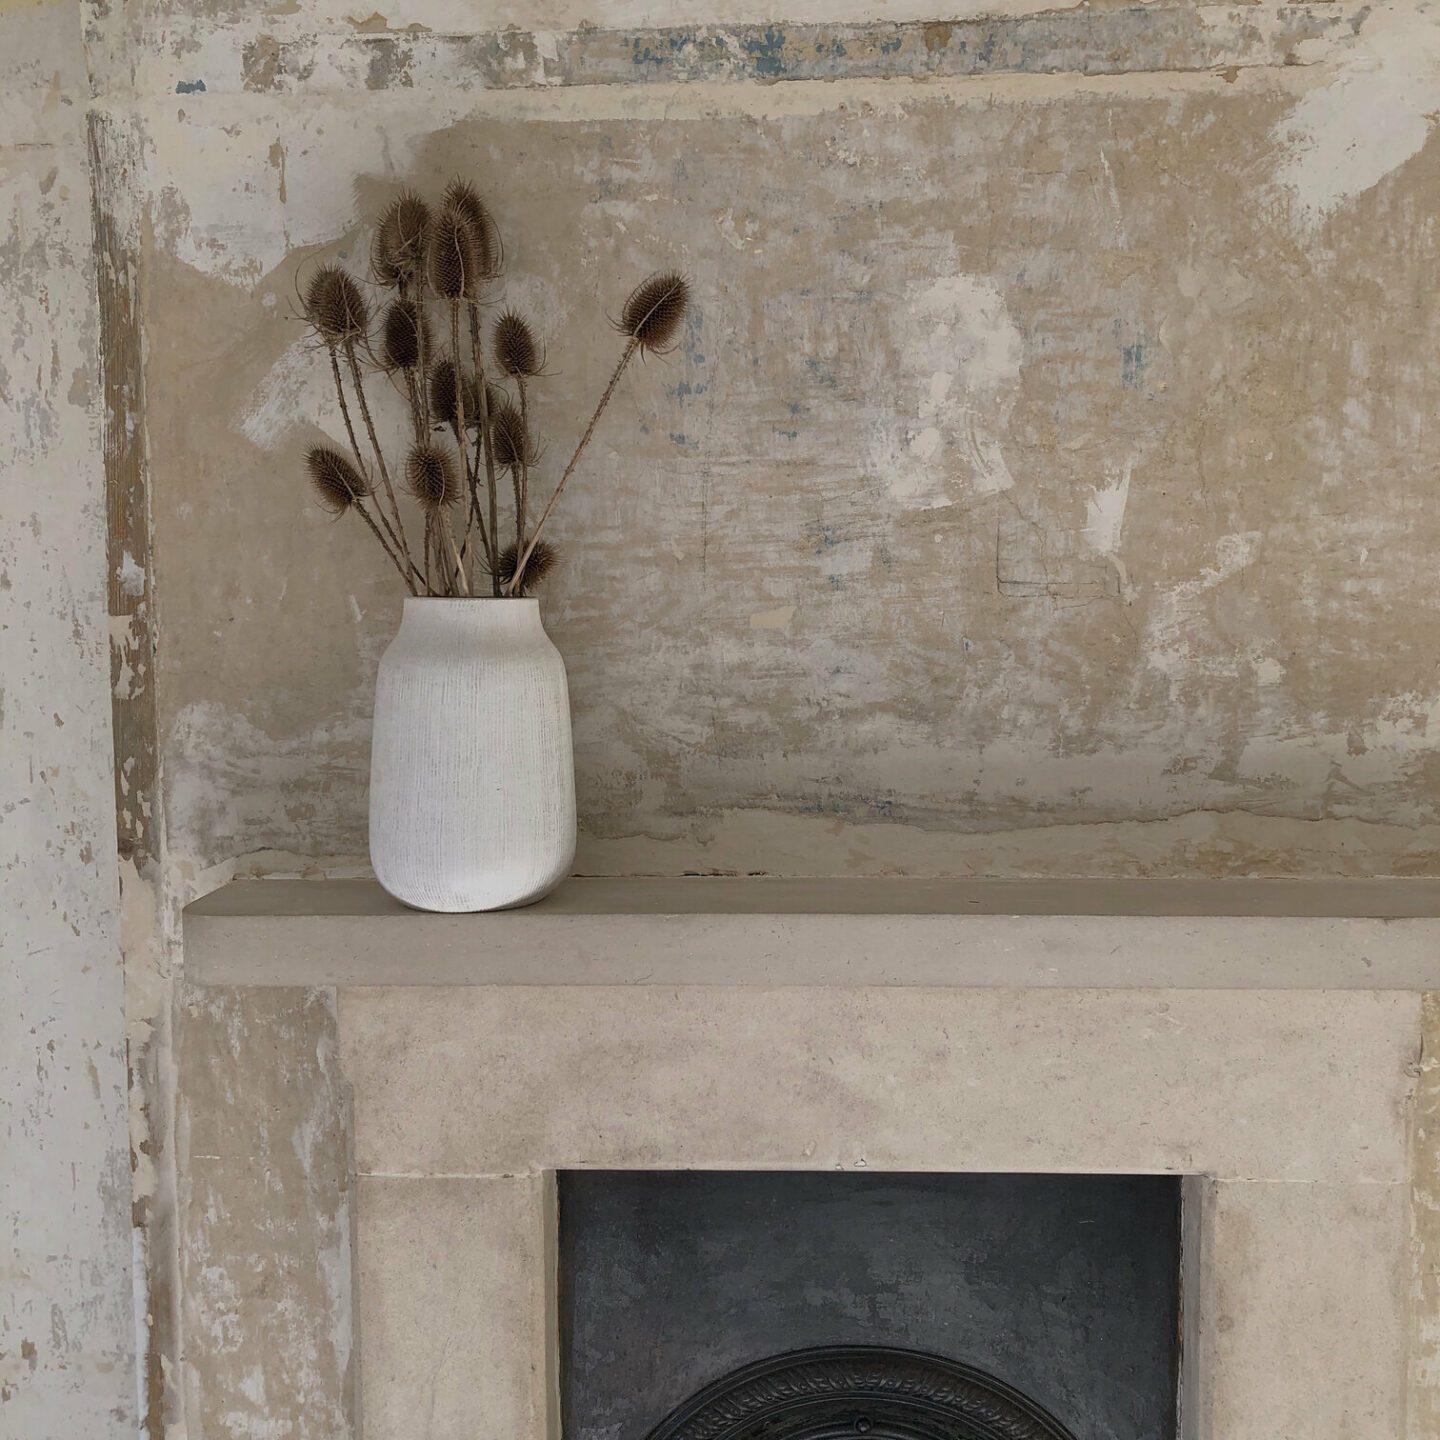 Rustic wallpaper-stripped walls and a vase of teasels 